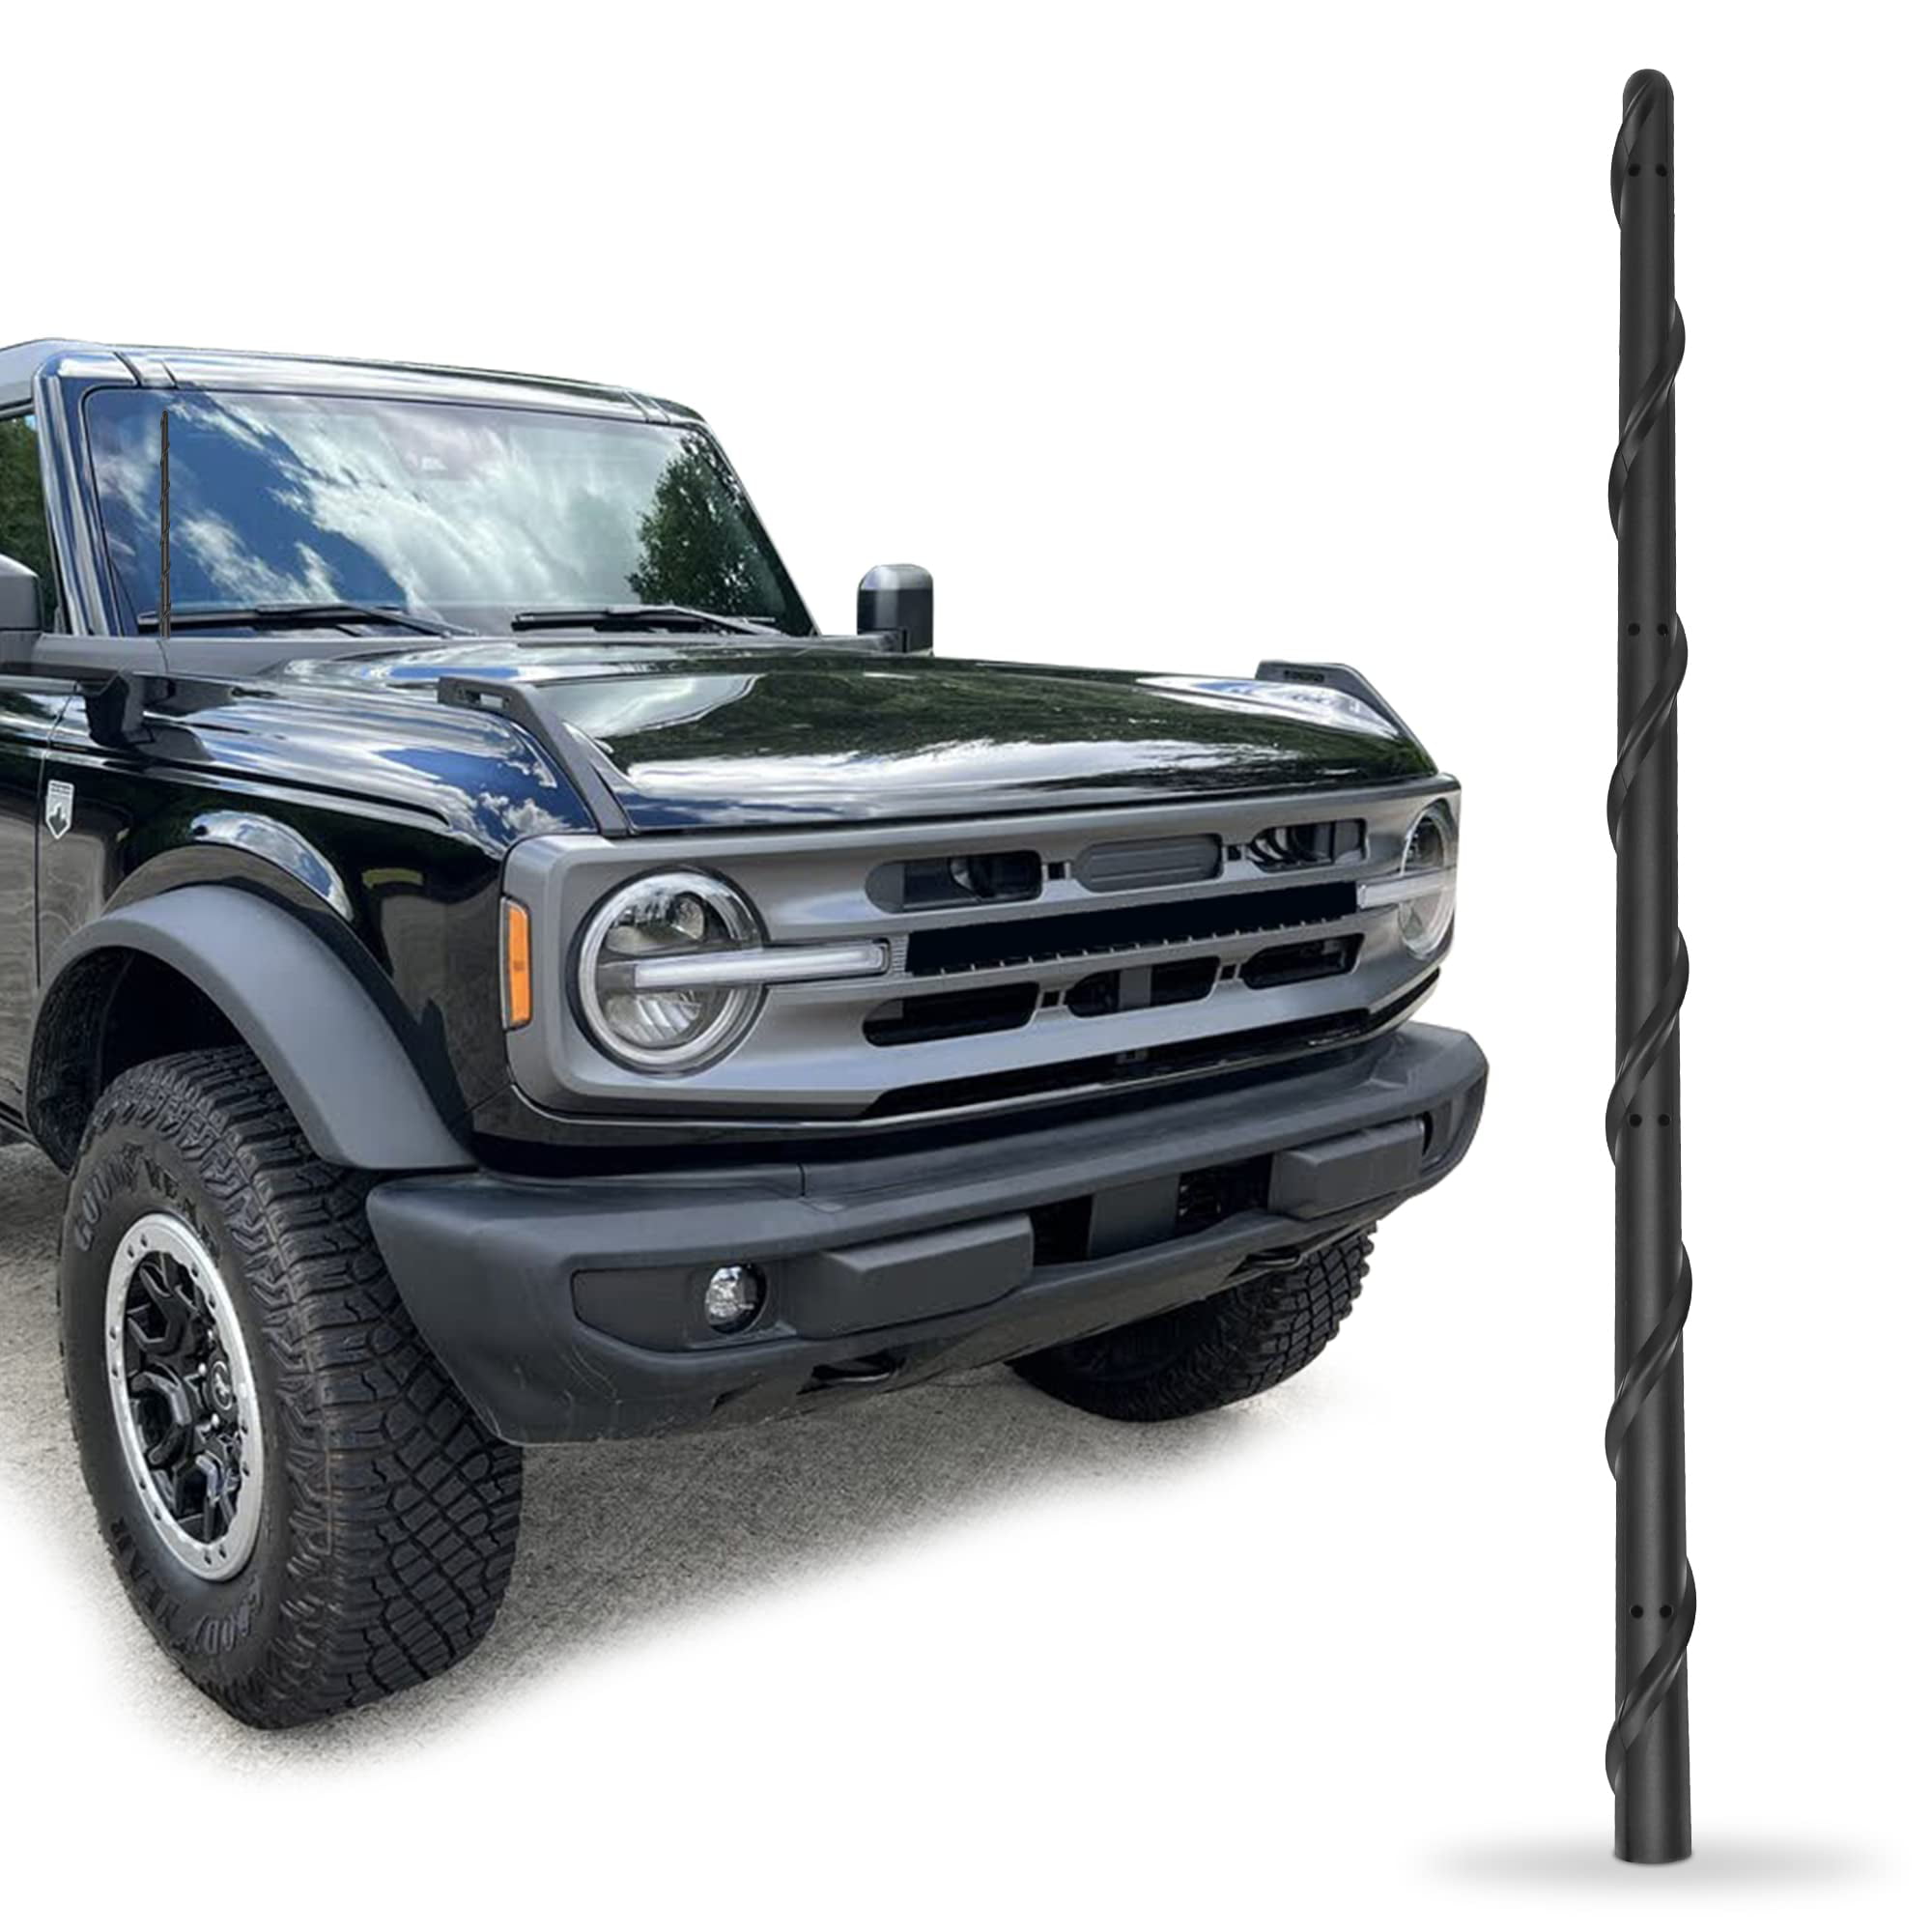 Antenna for Ford F150 Bronco Ford F150 Accessories, Ford Accessories, F150 Short Antenna 13 Inch, Bronco Radio Antenna for FM AM -